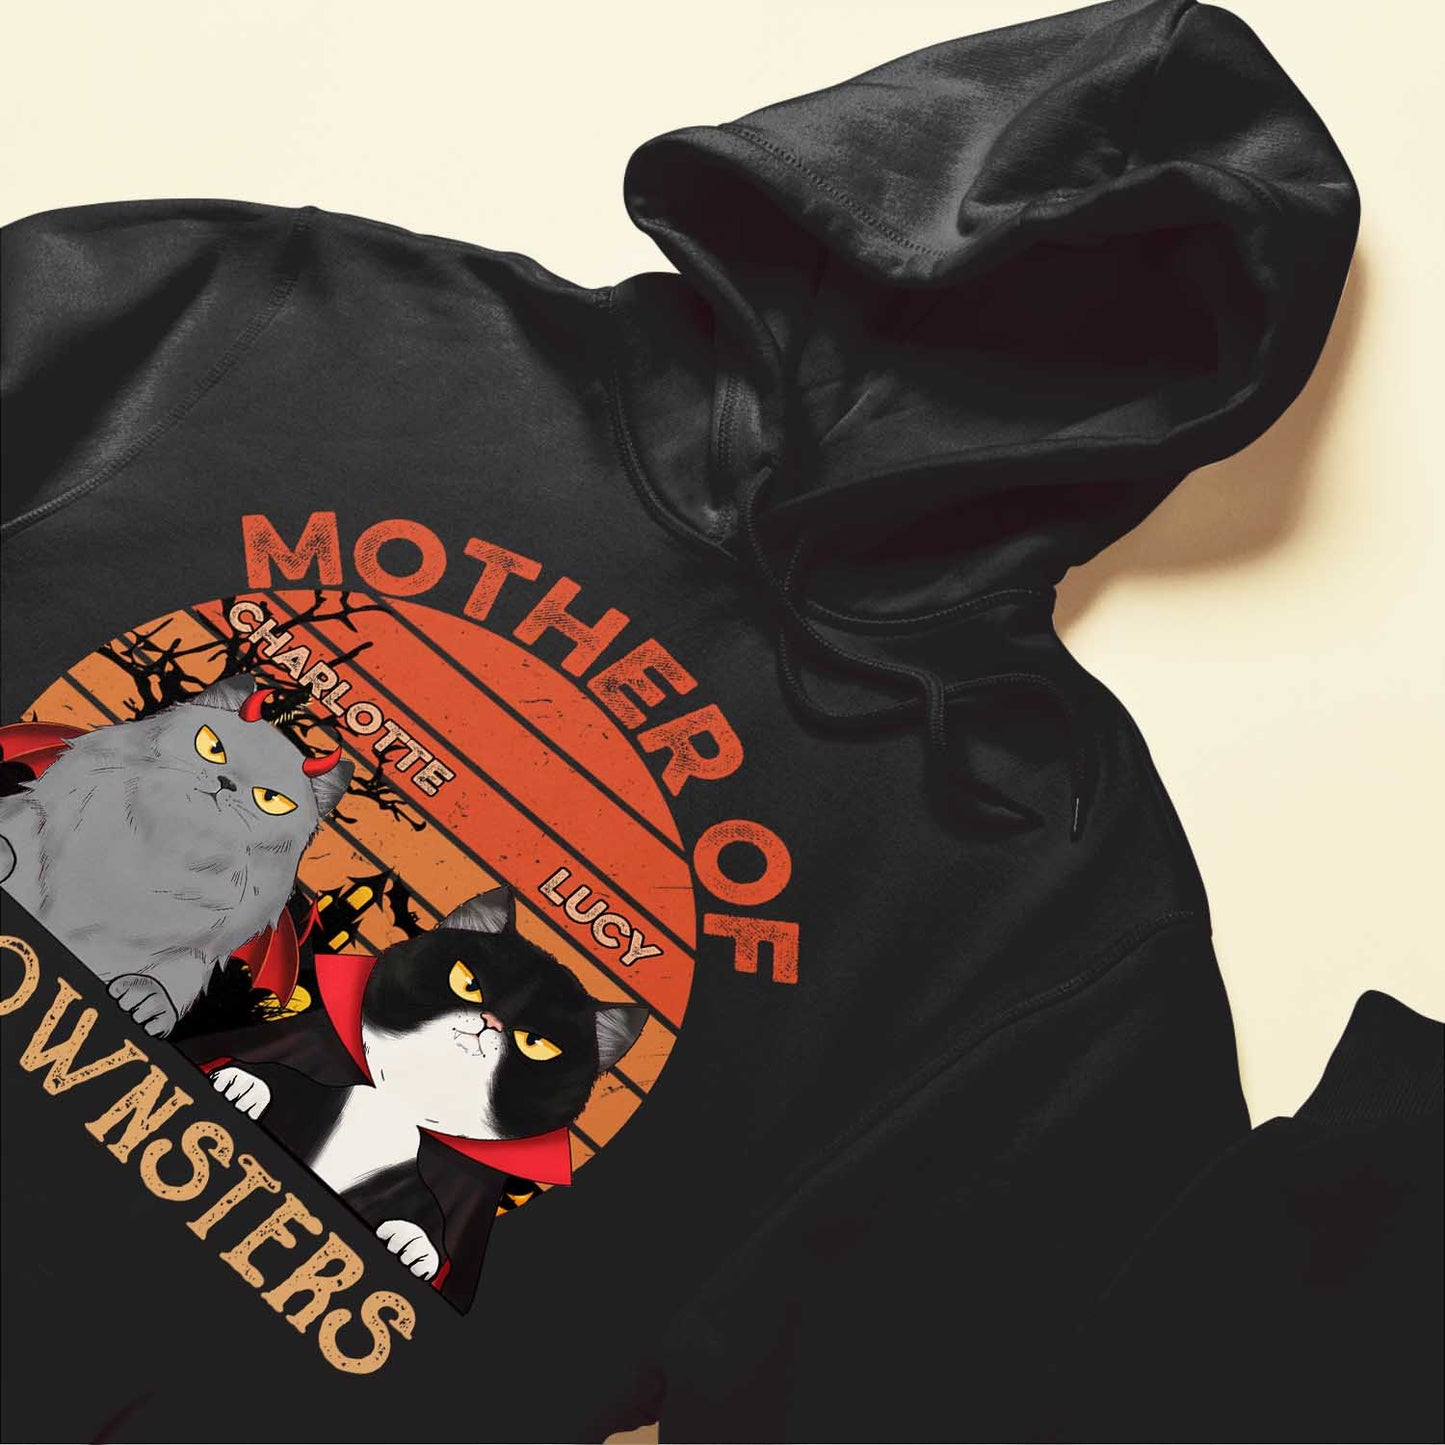 Mother Of Meownsters - Personalized Shirt